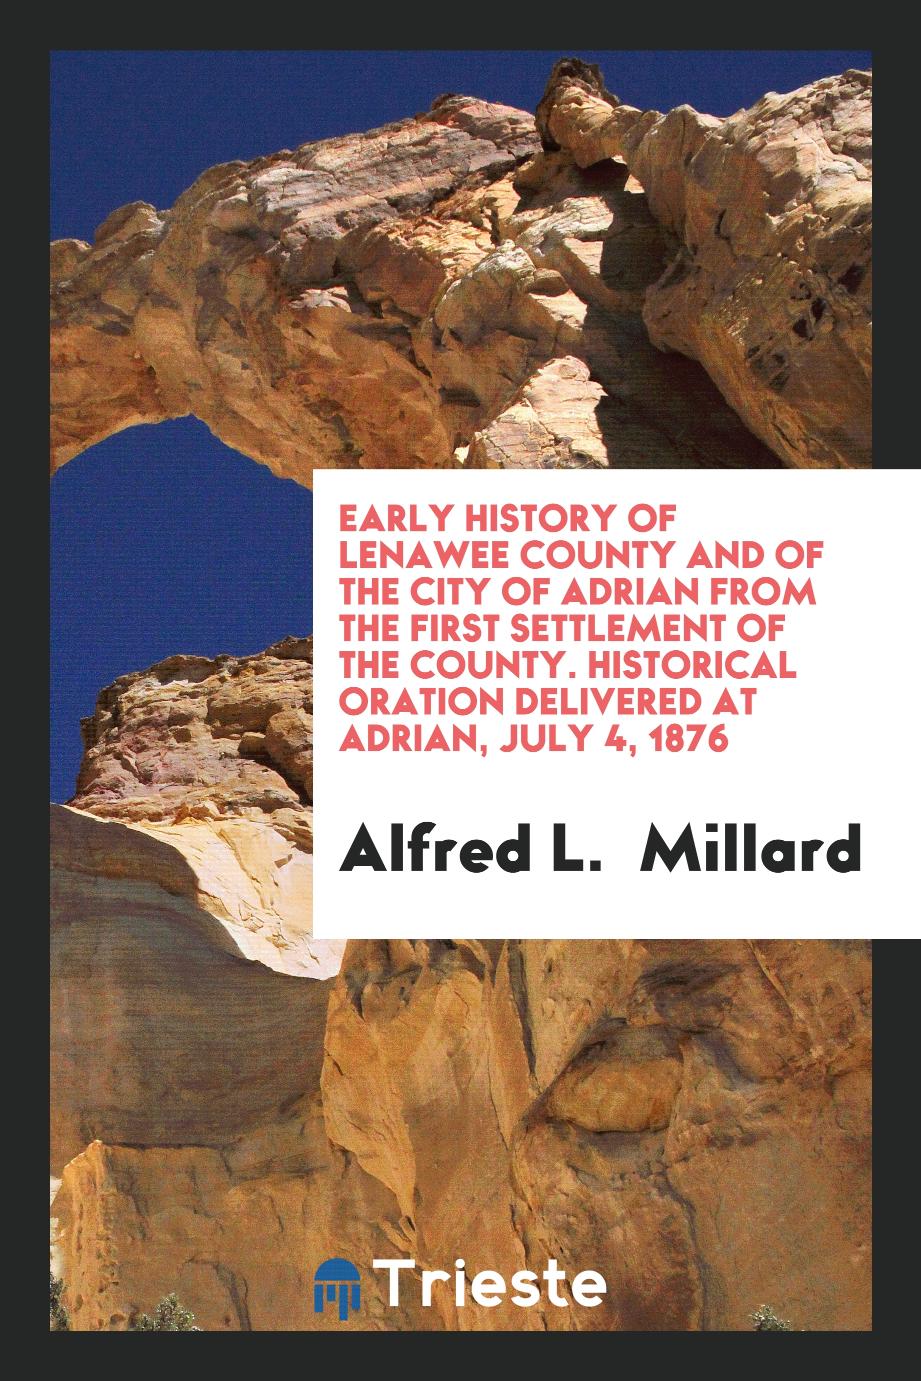 Early History of Lenawee County and of the City of Adrian from the First Settlement of the County. Historical Oration Delivered at Adrian, July 4, 1876